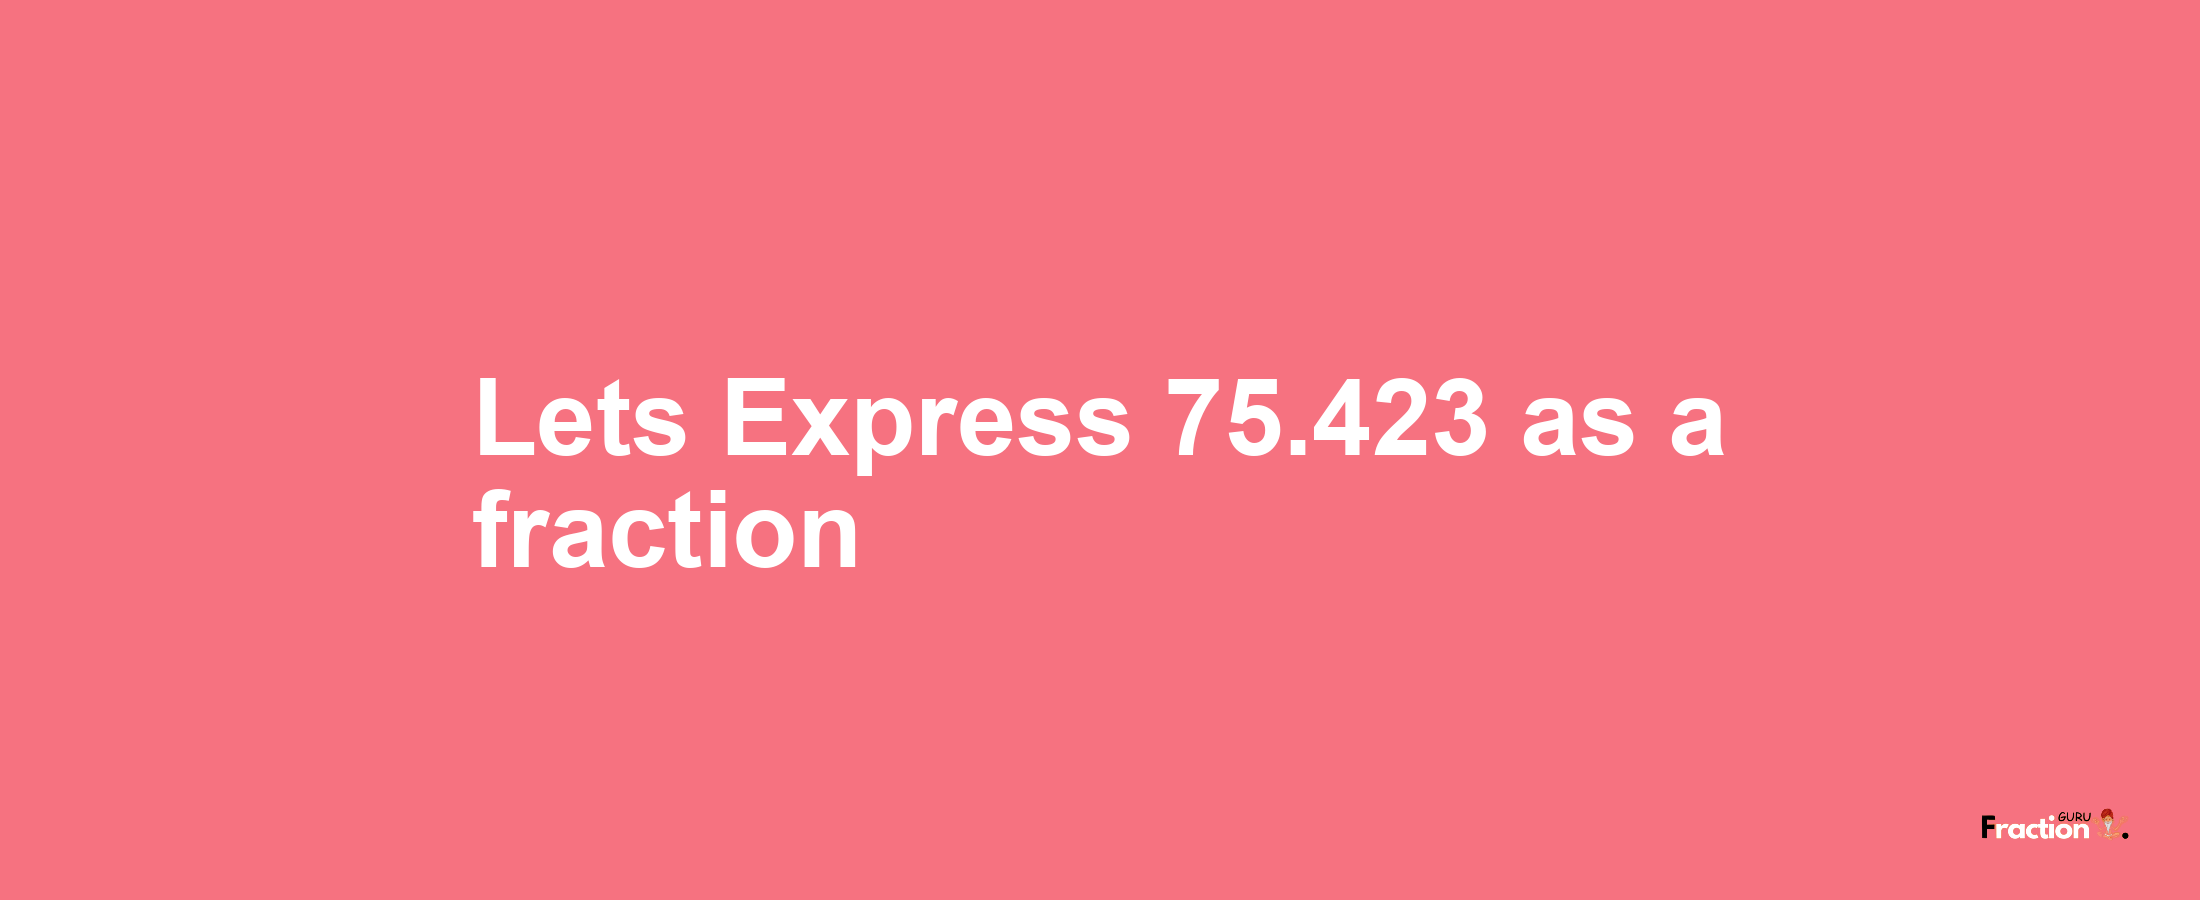 Lets Express 75.423 as afraction